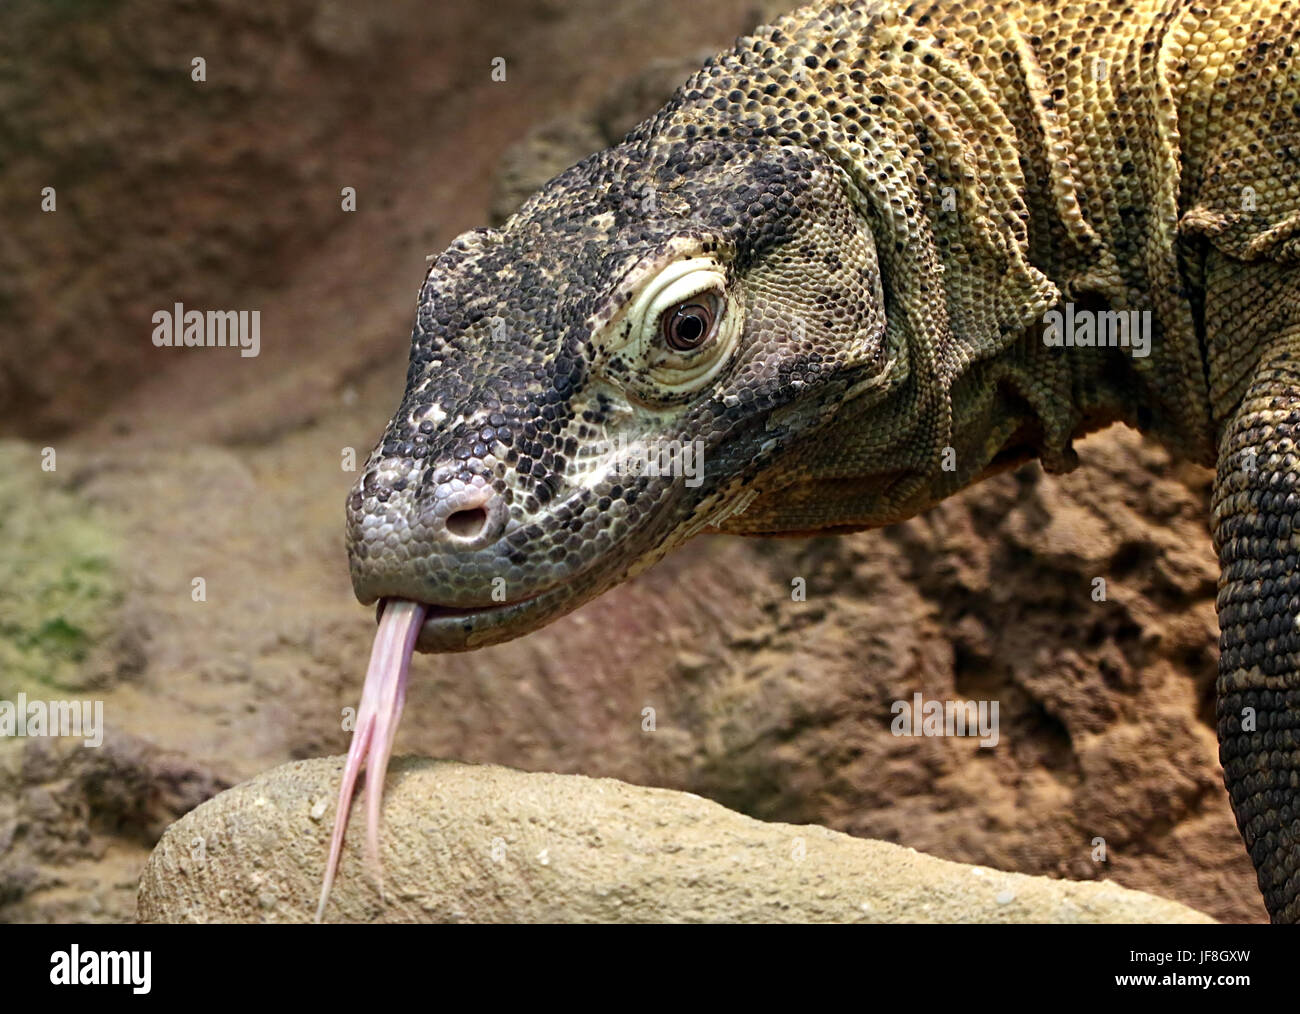 Close-up of the head of an Indonesian Komodo dragon (Varanus komodoensis), forked tongue flicking out, picking up scents in the air. Stock Photo